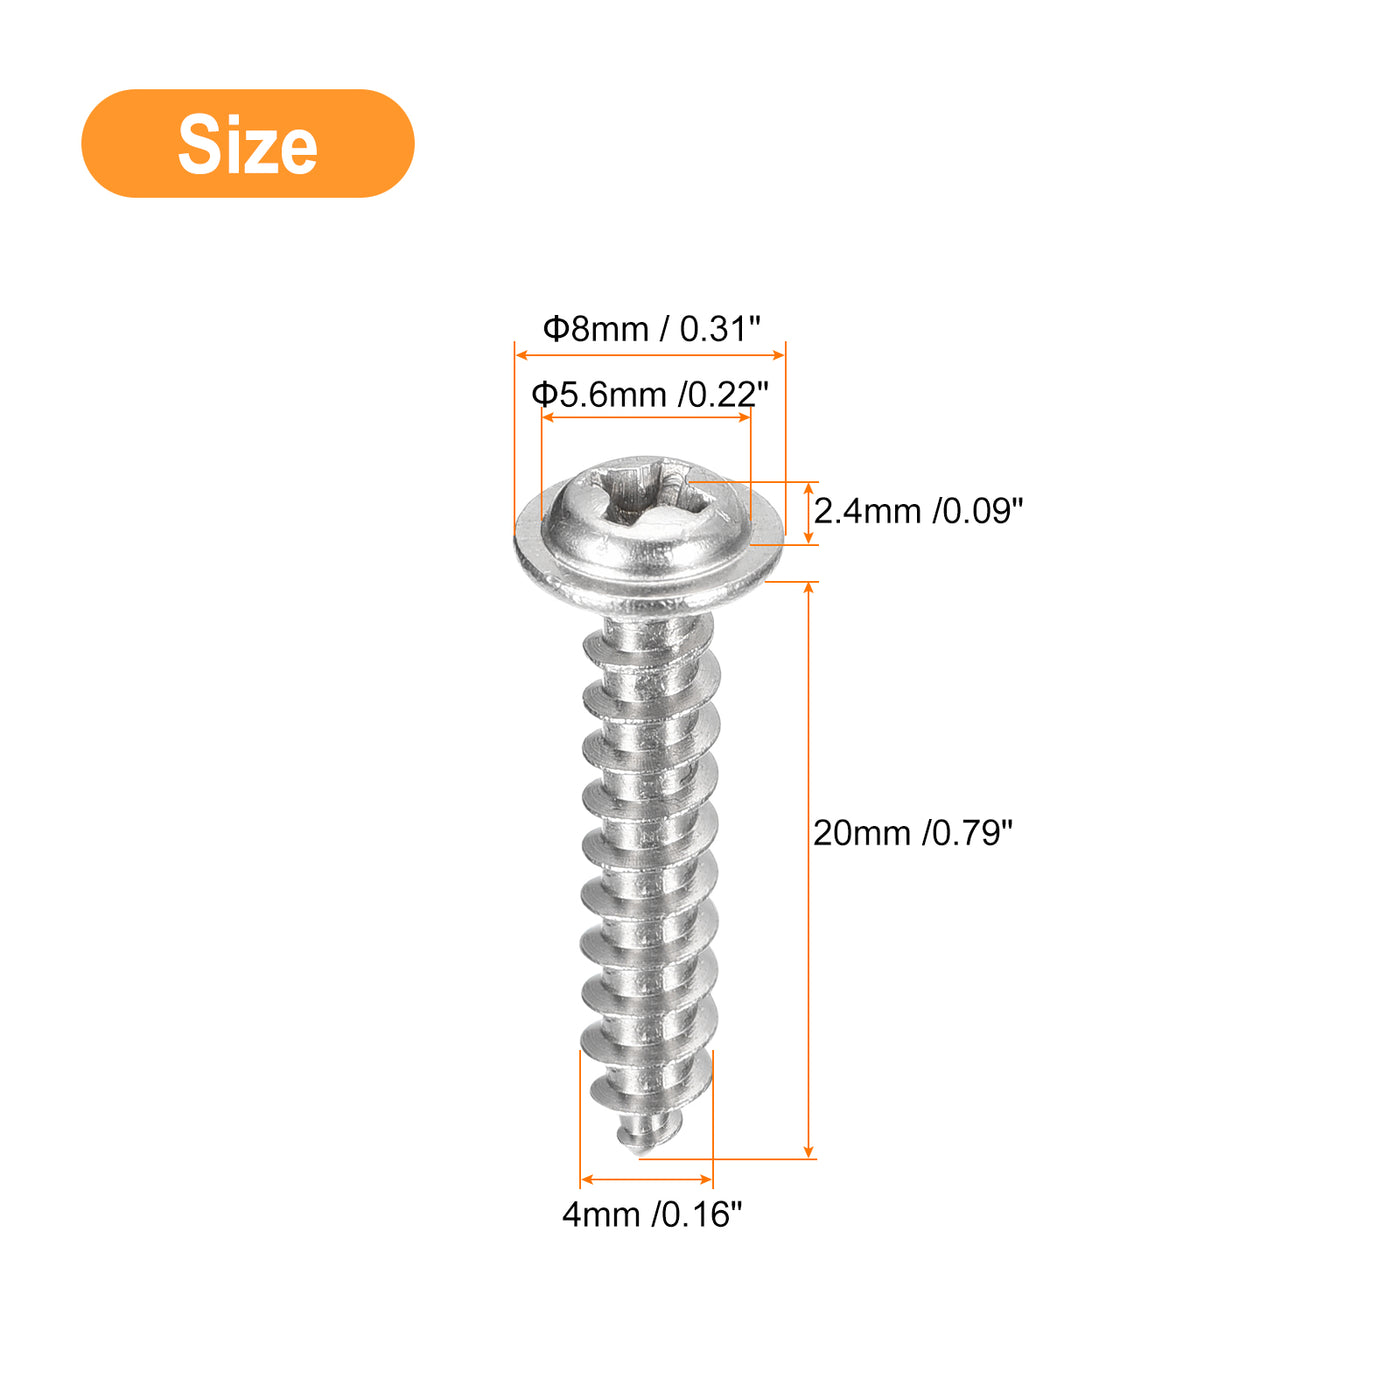 uxcell Uxcell ST4x20mm Phillips Pan Head Self-tapping Screw with Washer, 100pcs - 304 Stainless Steel Wood Screw Full Thread (Silver)